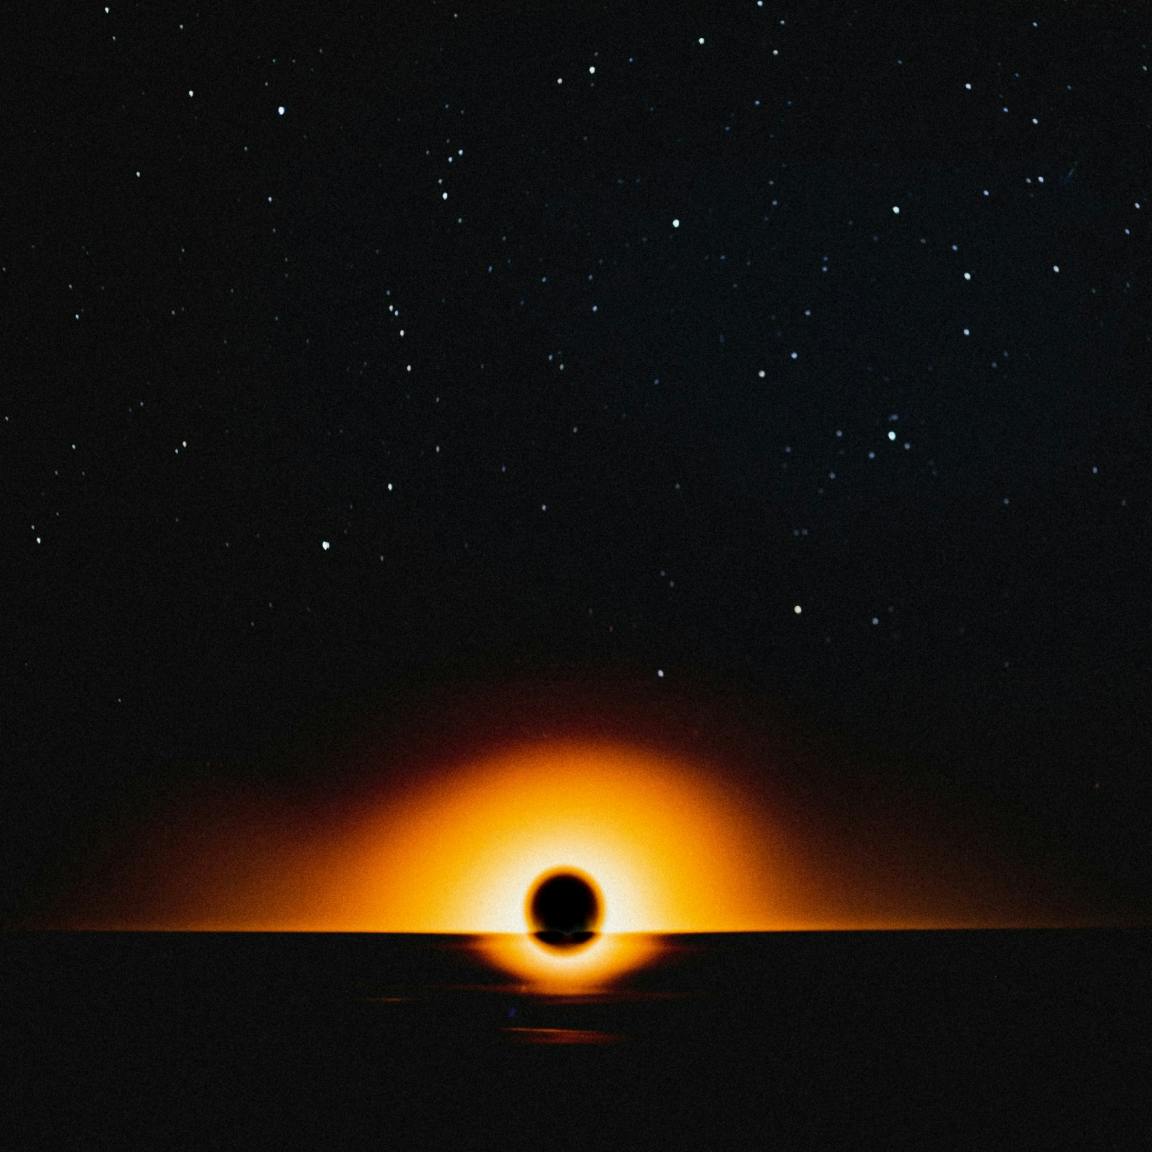 An artistic rendering of a black hole in space